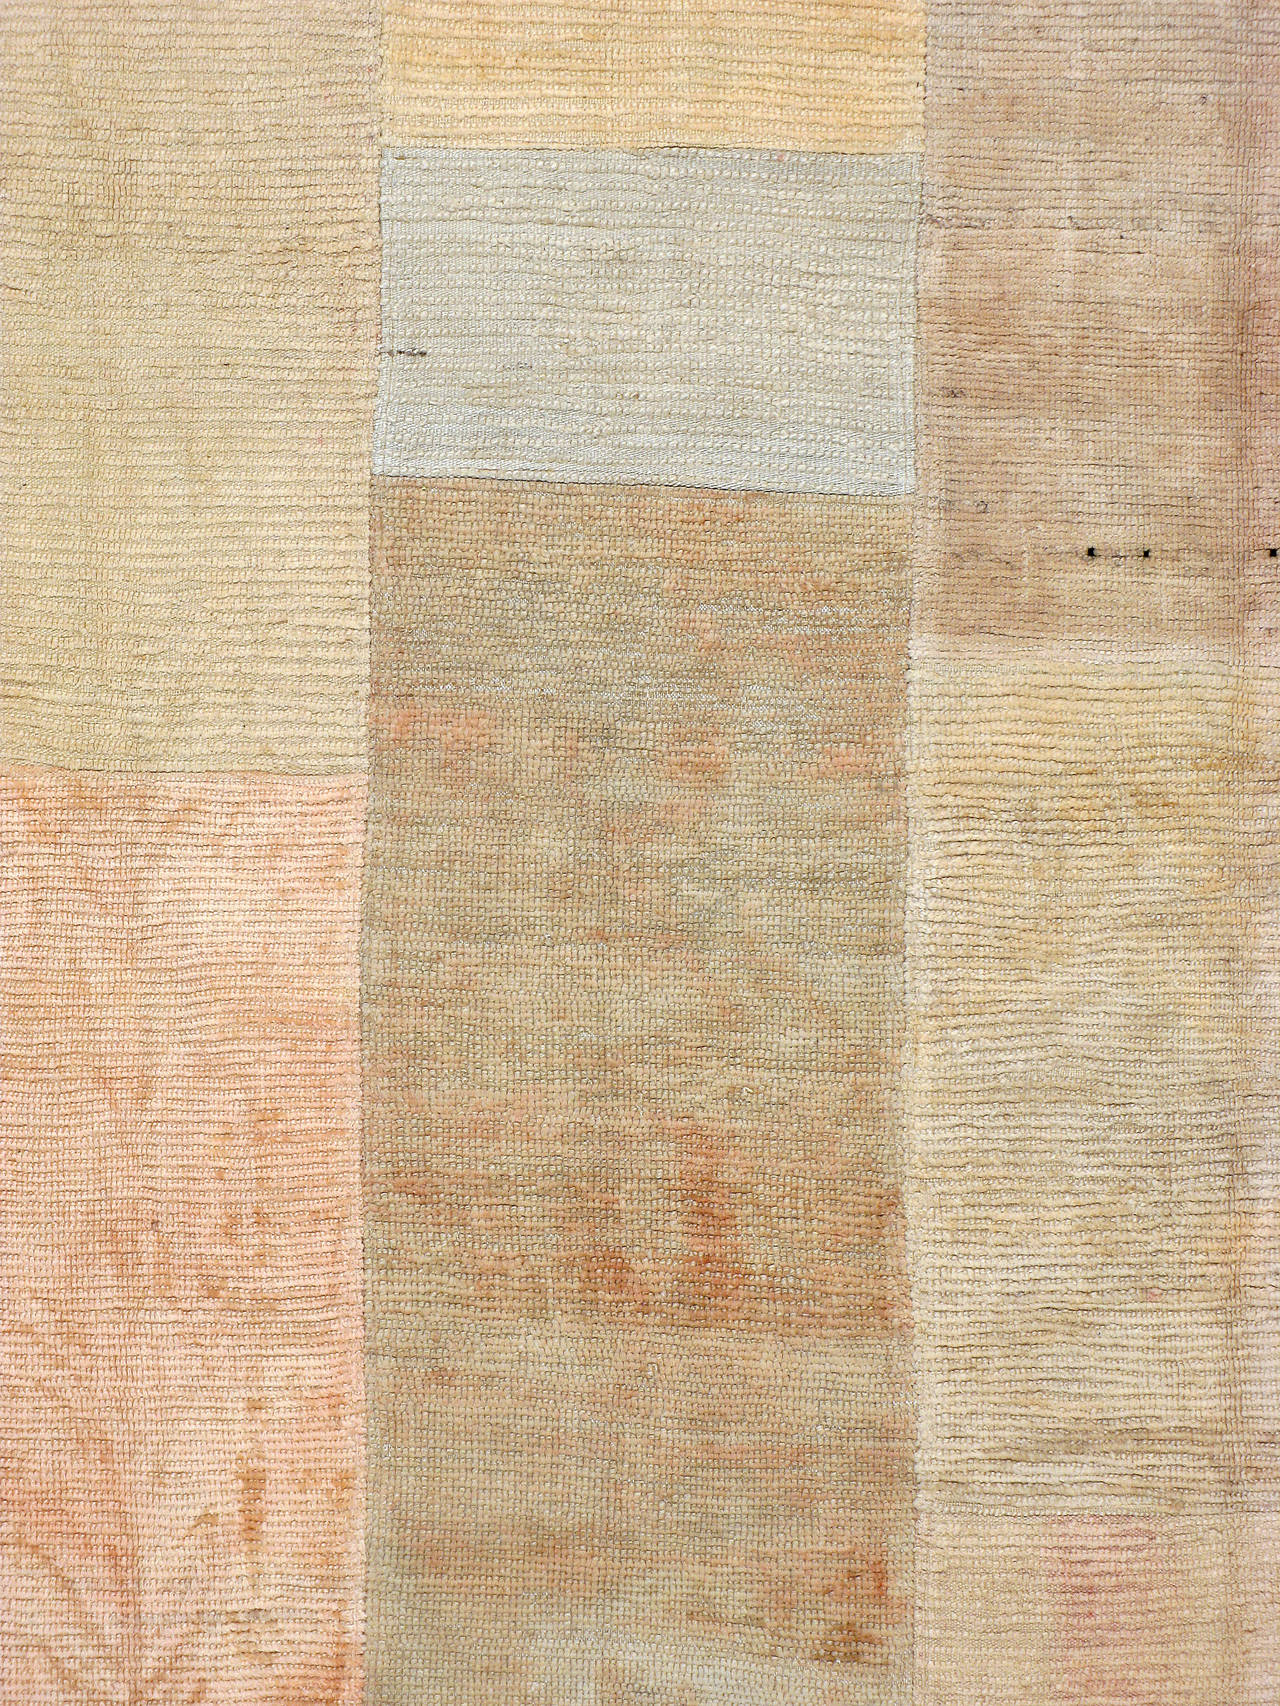 A Tulu carpet constructed of vintage Tulu carpets joined by hand-stitching.